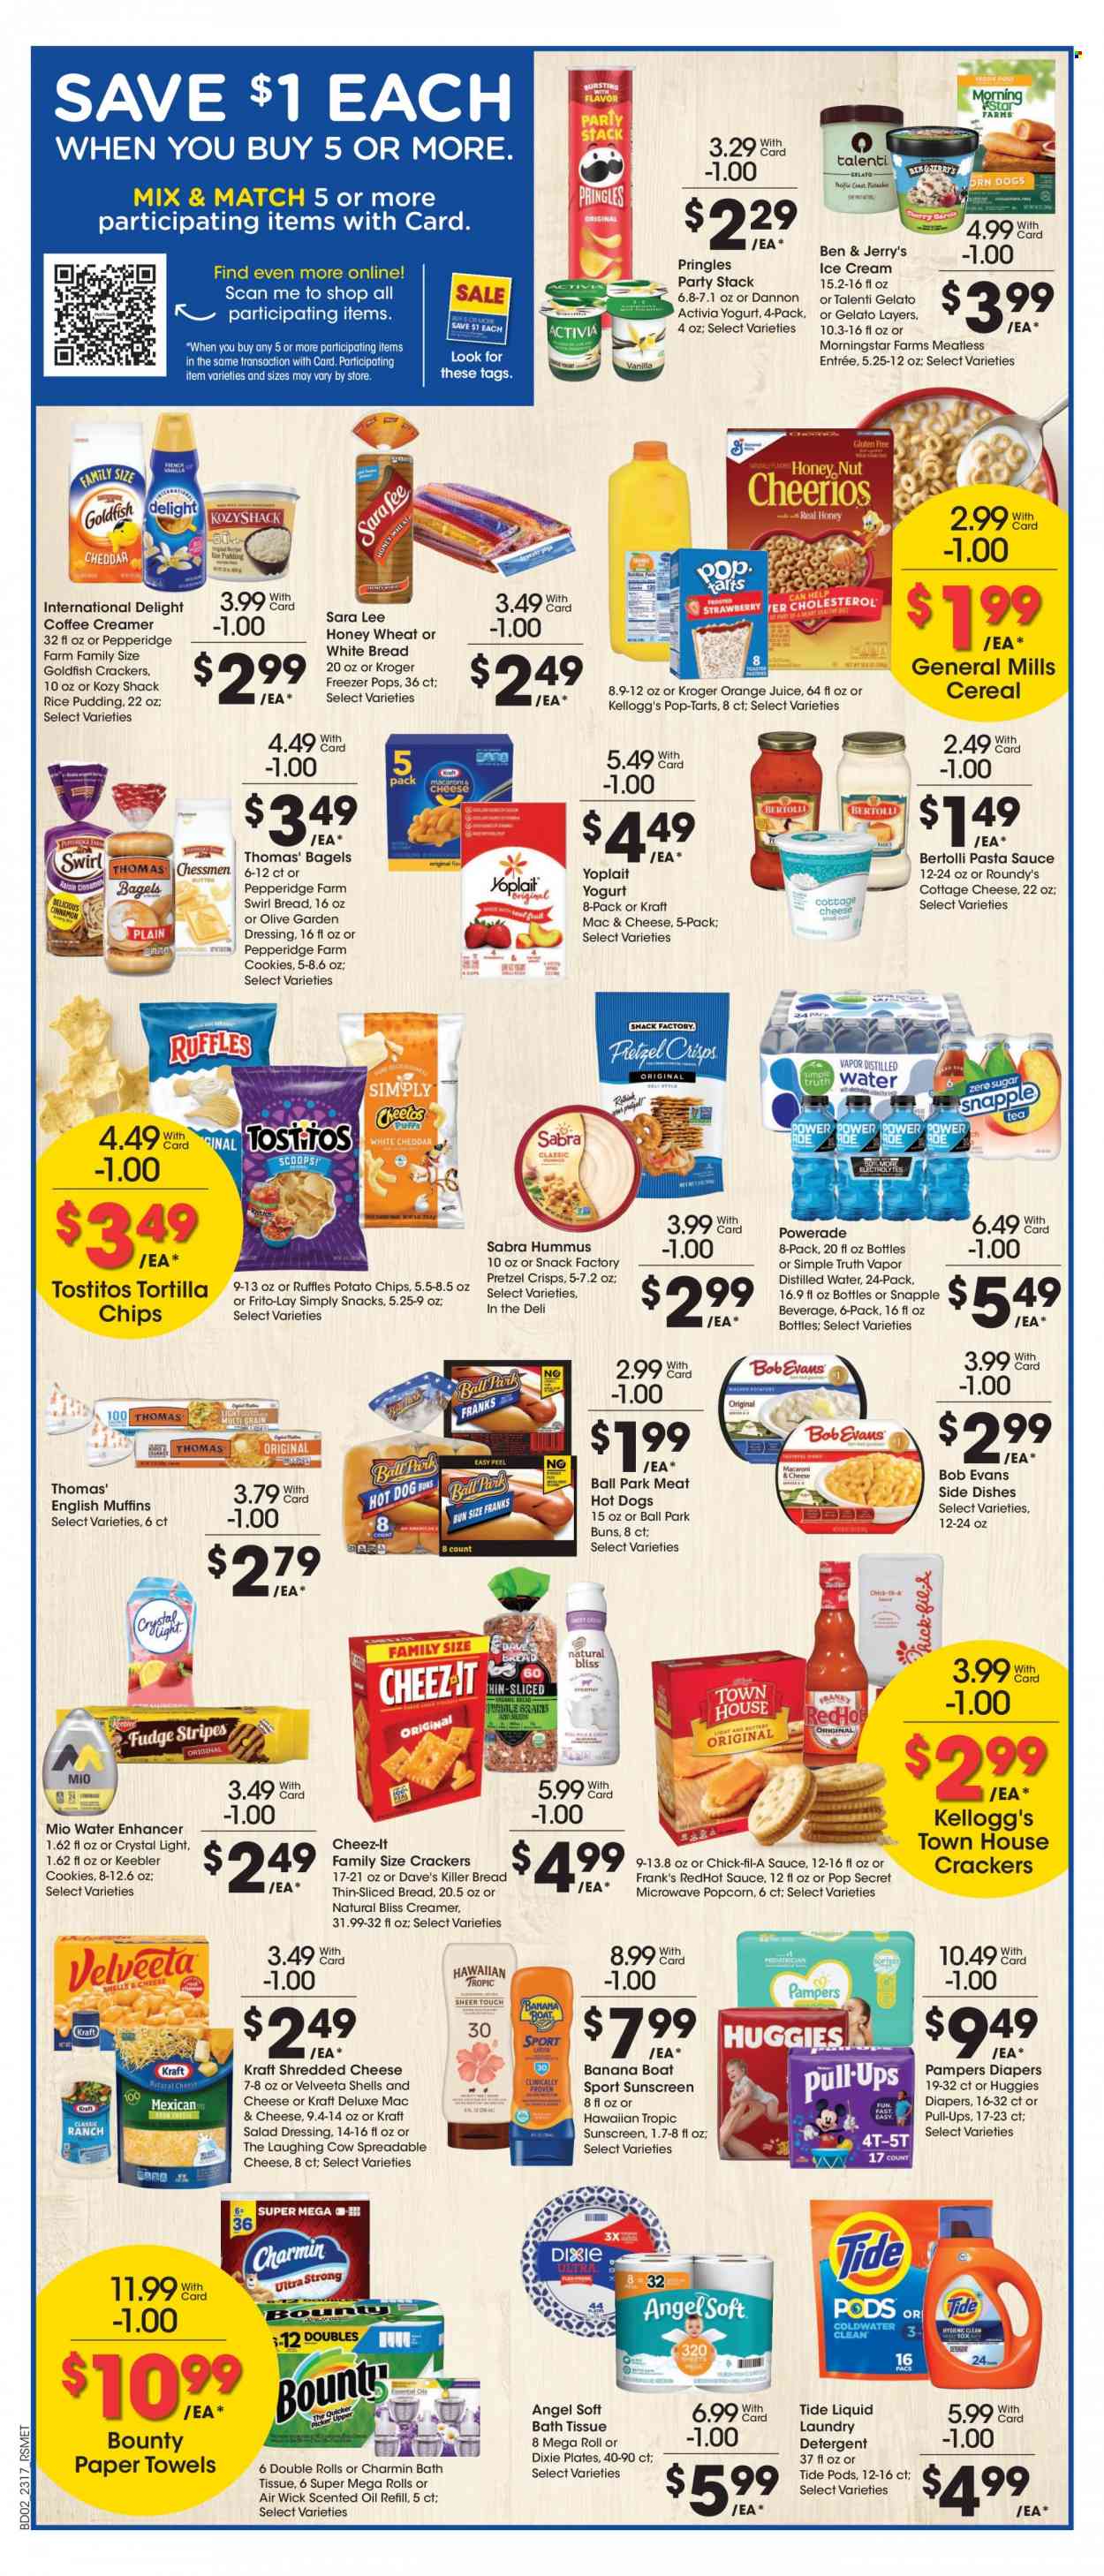 thumbnail - Pick ‘n Save Flyer - 05/24/2023 - 05/30/2023 - Sales products - bagels, white bread, buns, Sara Lee, hot dog, pasta sauce, MorningStar Farms, Kraft®, Bob Evans, Bertolli, hummus, cottage cheese, shredded cheese, The Laughing Cow, Activia, Yoplait, Dannon, rice pudding, creamer, ice cream, Ben & Jerry's, Talenti Gelato, gelato, cookies, Bounty, crackers, Kellogg's, Pop-Tarts, Keebler, tortilla chips, potato chips, Pringles, chips, popcorn, Frito-Lay, Cheez-It, Tostitos, pretzel crisps, salty snack, cereals, salad dressing, dressing, syrup, Powerade, orange juice, juice, energy drink, Snapple, Huggies, Pampers, nappies, bath tissue, kitchen towels, paper towels, Charmin, detergent, Tide, laundry detergent, Hawaiian Tropic, plate, Air Wick, scented oil, Dixie, boat. Page 6.